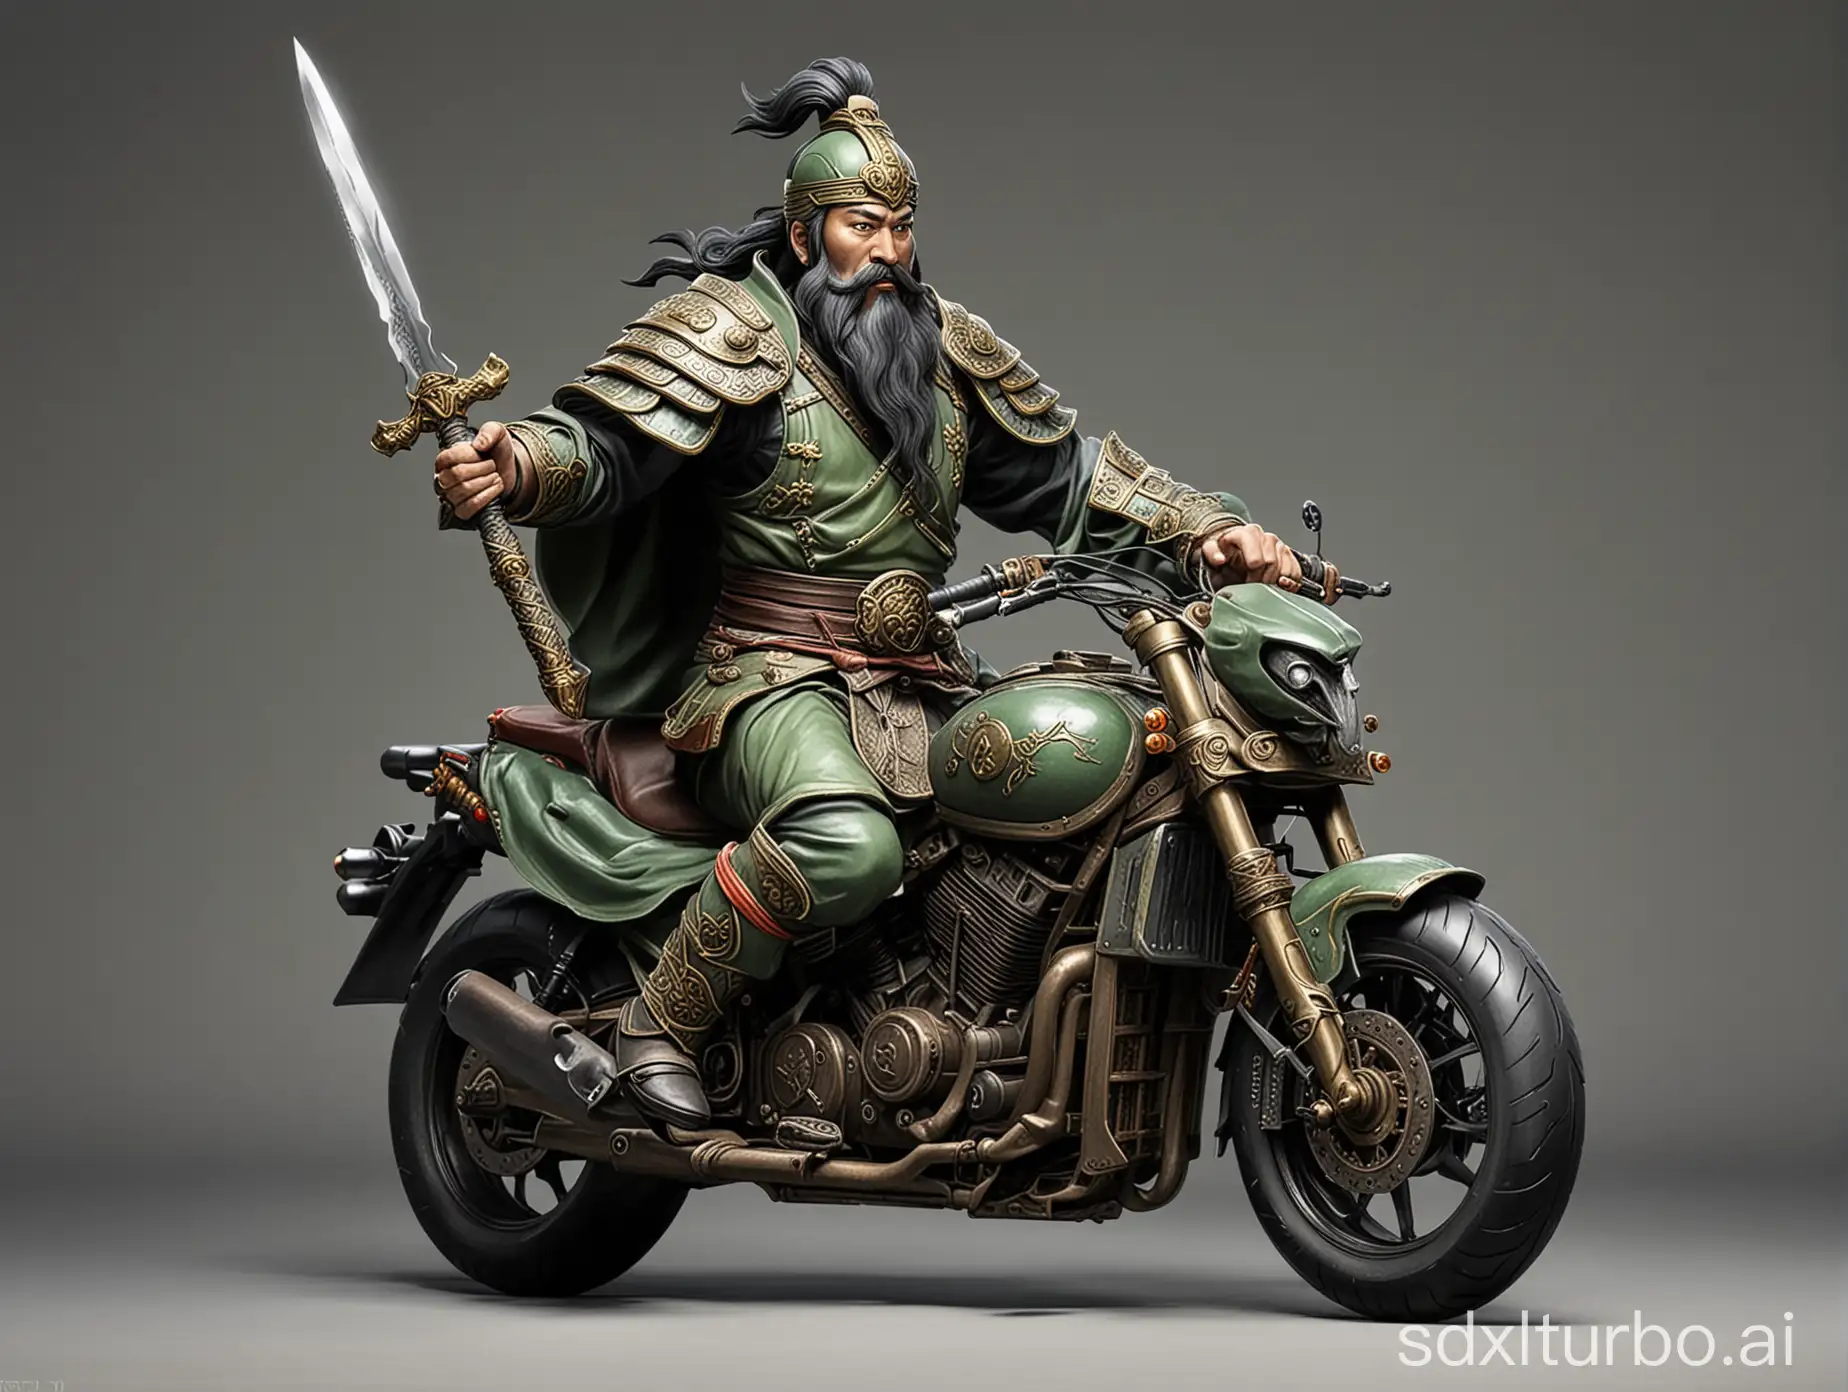 Guan-Yu-on-Motorcycle-with-Big-Knife-Mythological-Warrior-in-Modern-Times